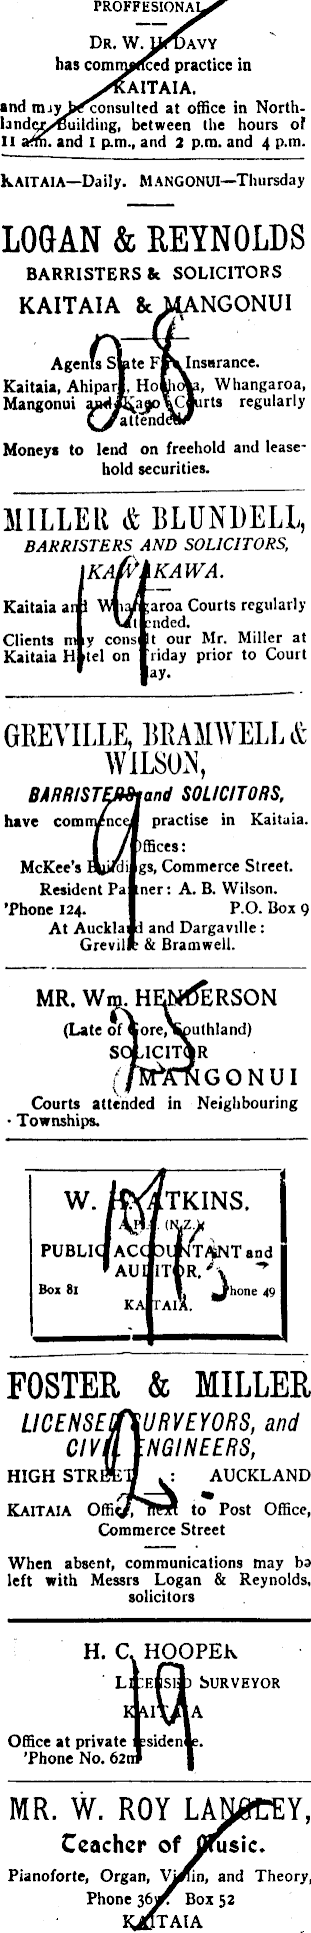 Papers Past Newspapers Northland Age 11 December 1922 Page 4 Advertisements Column 1